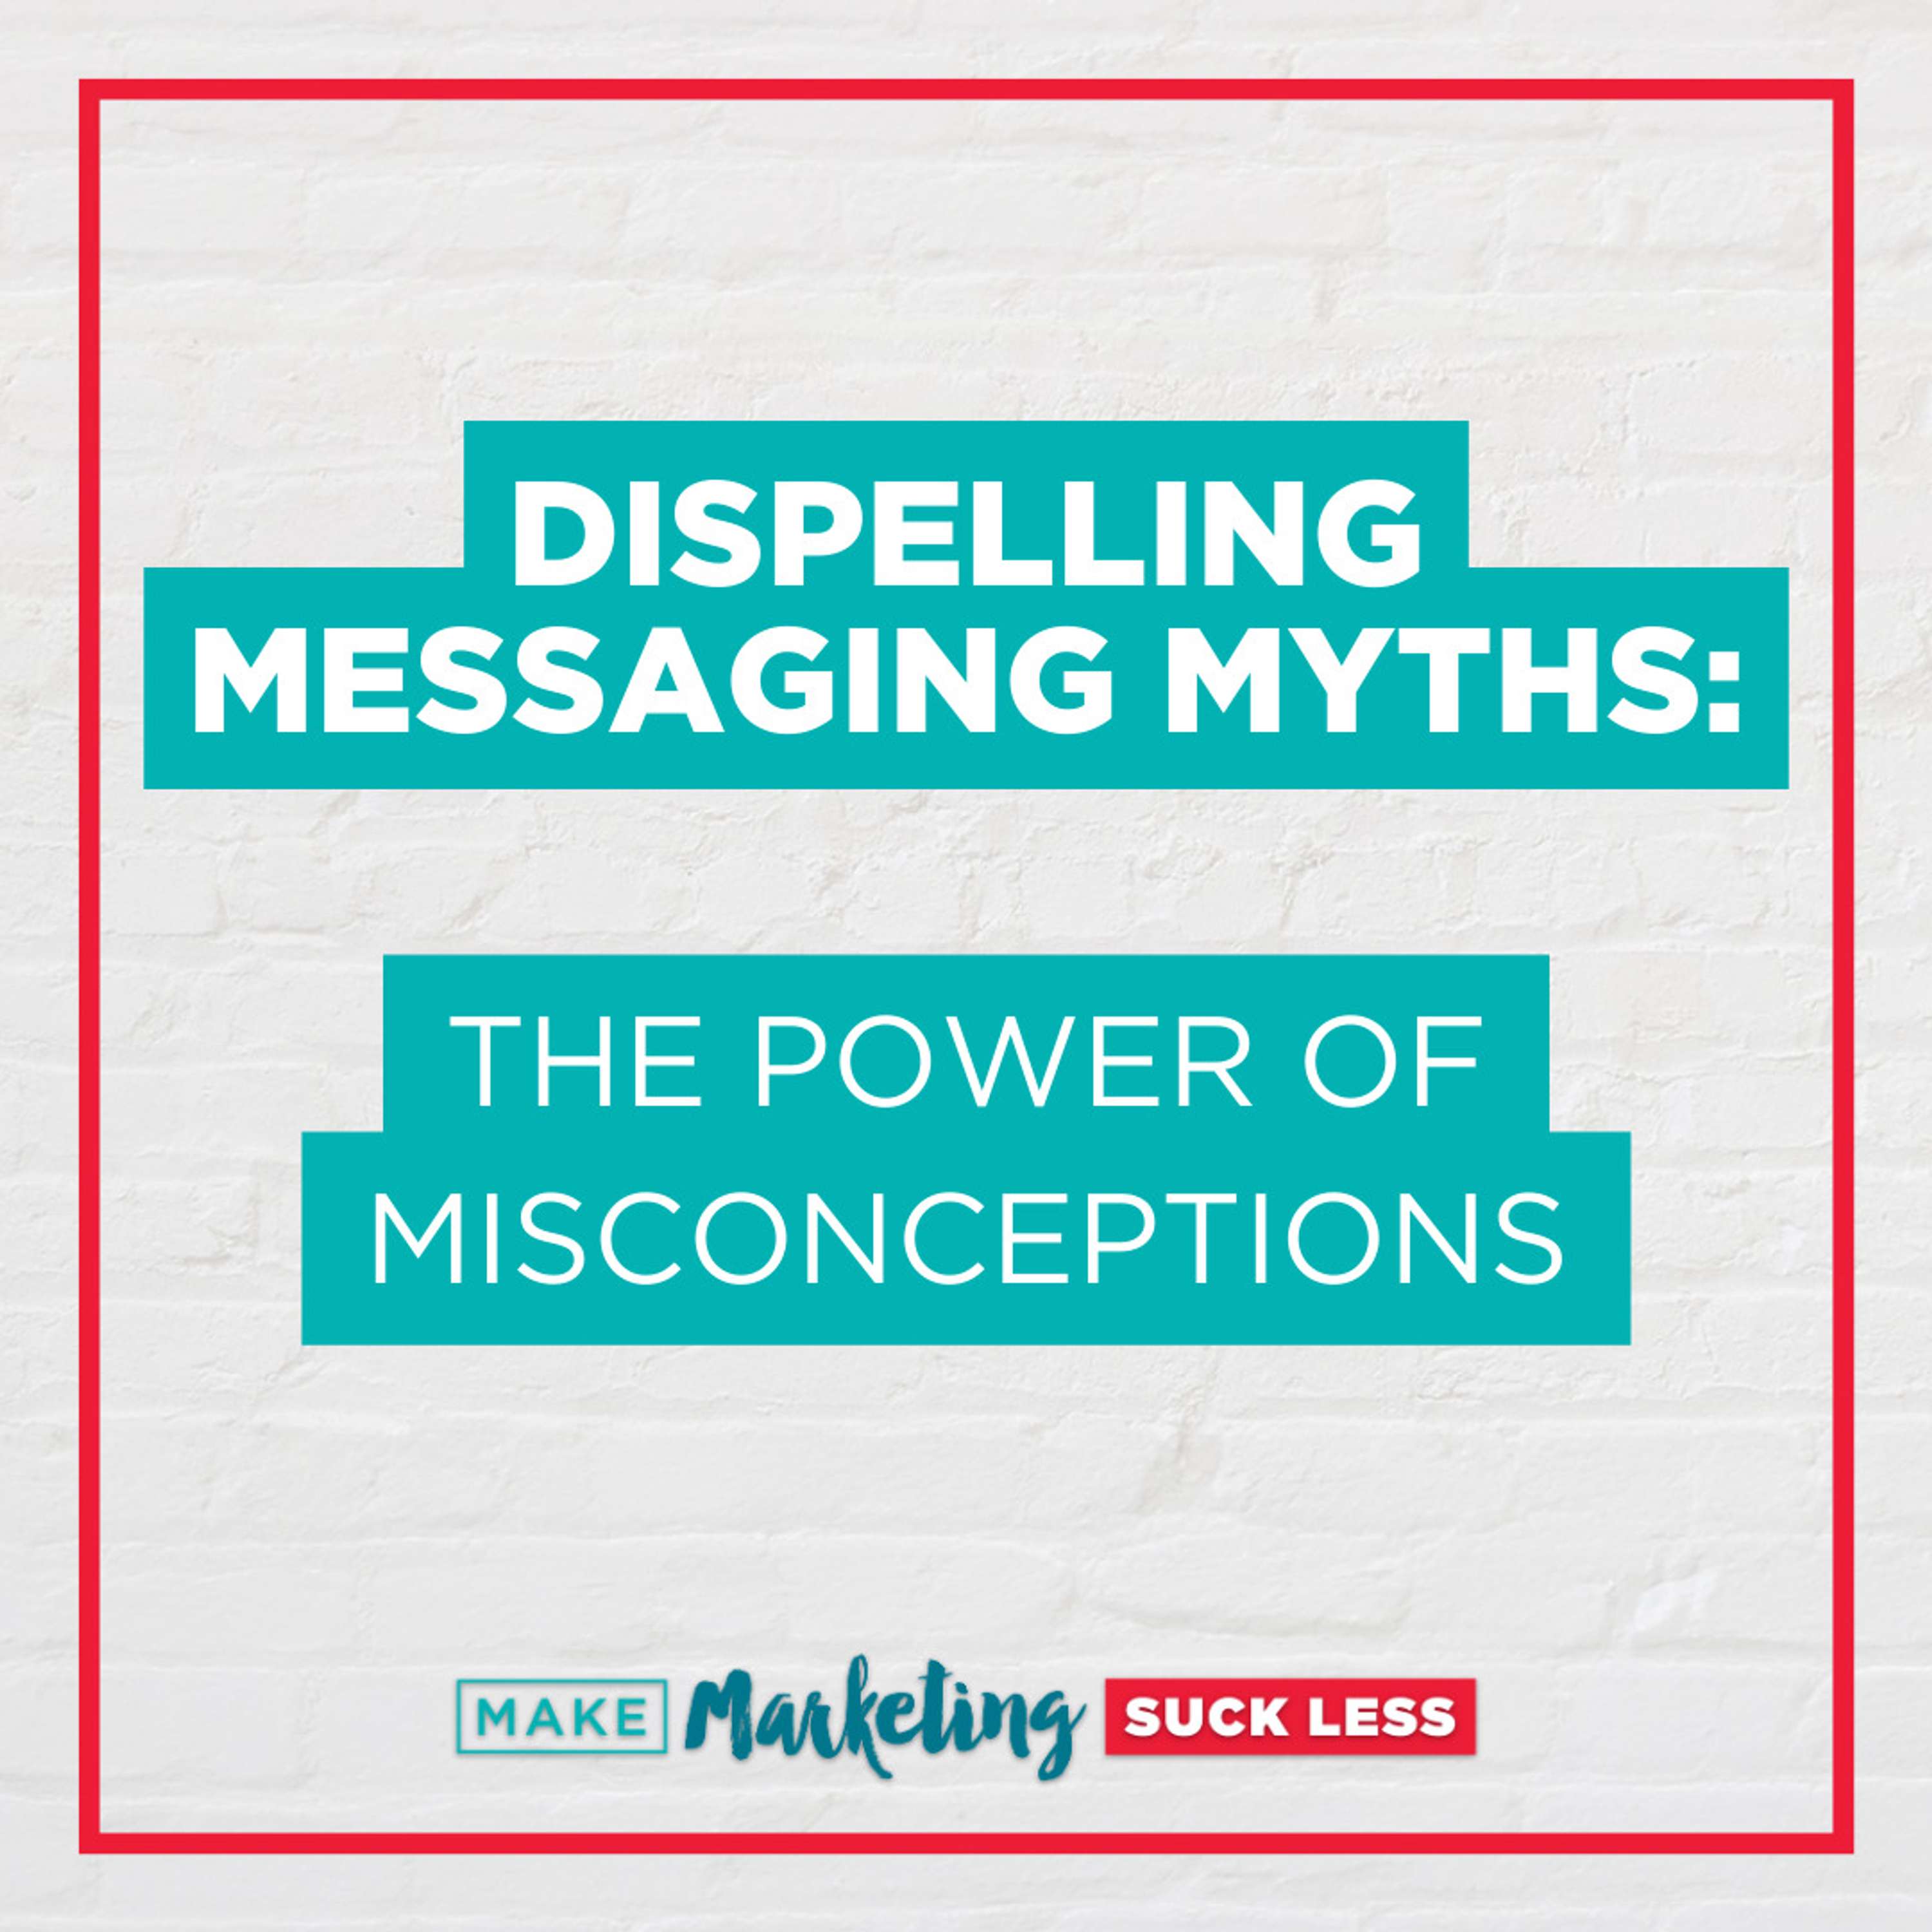 Dispelling Messaging Myths: The Power of Misconceptions